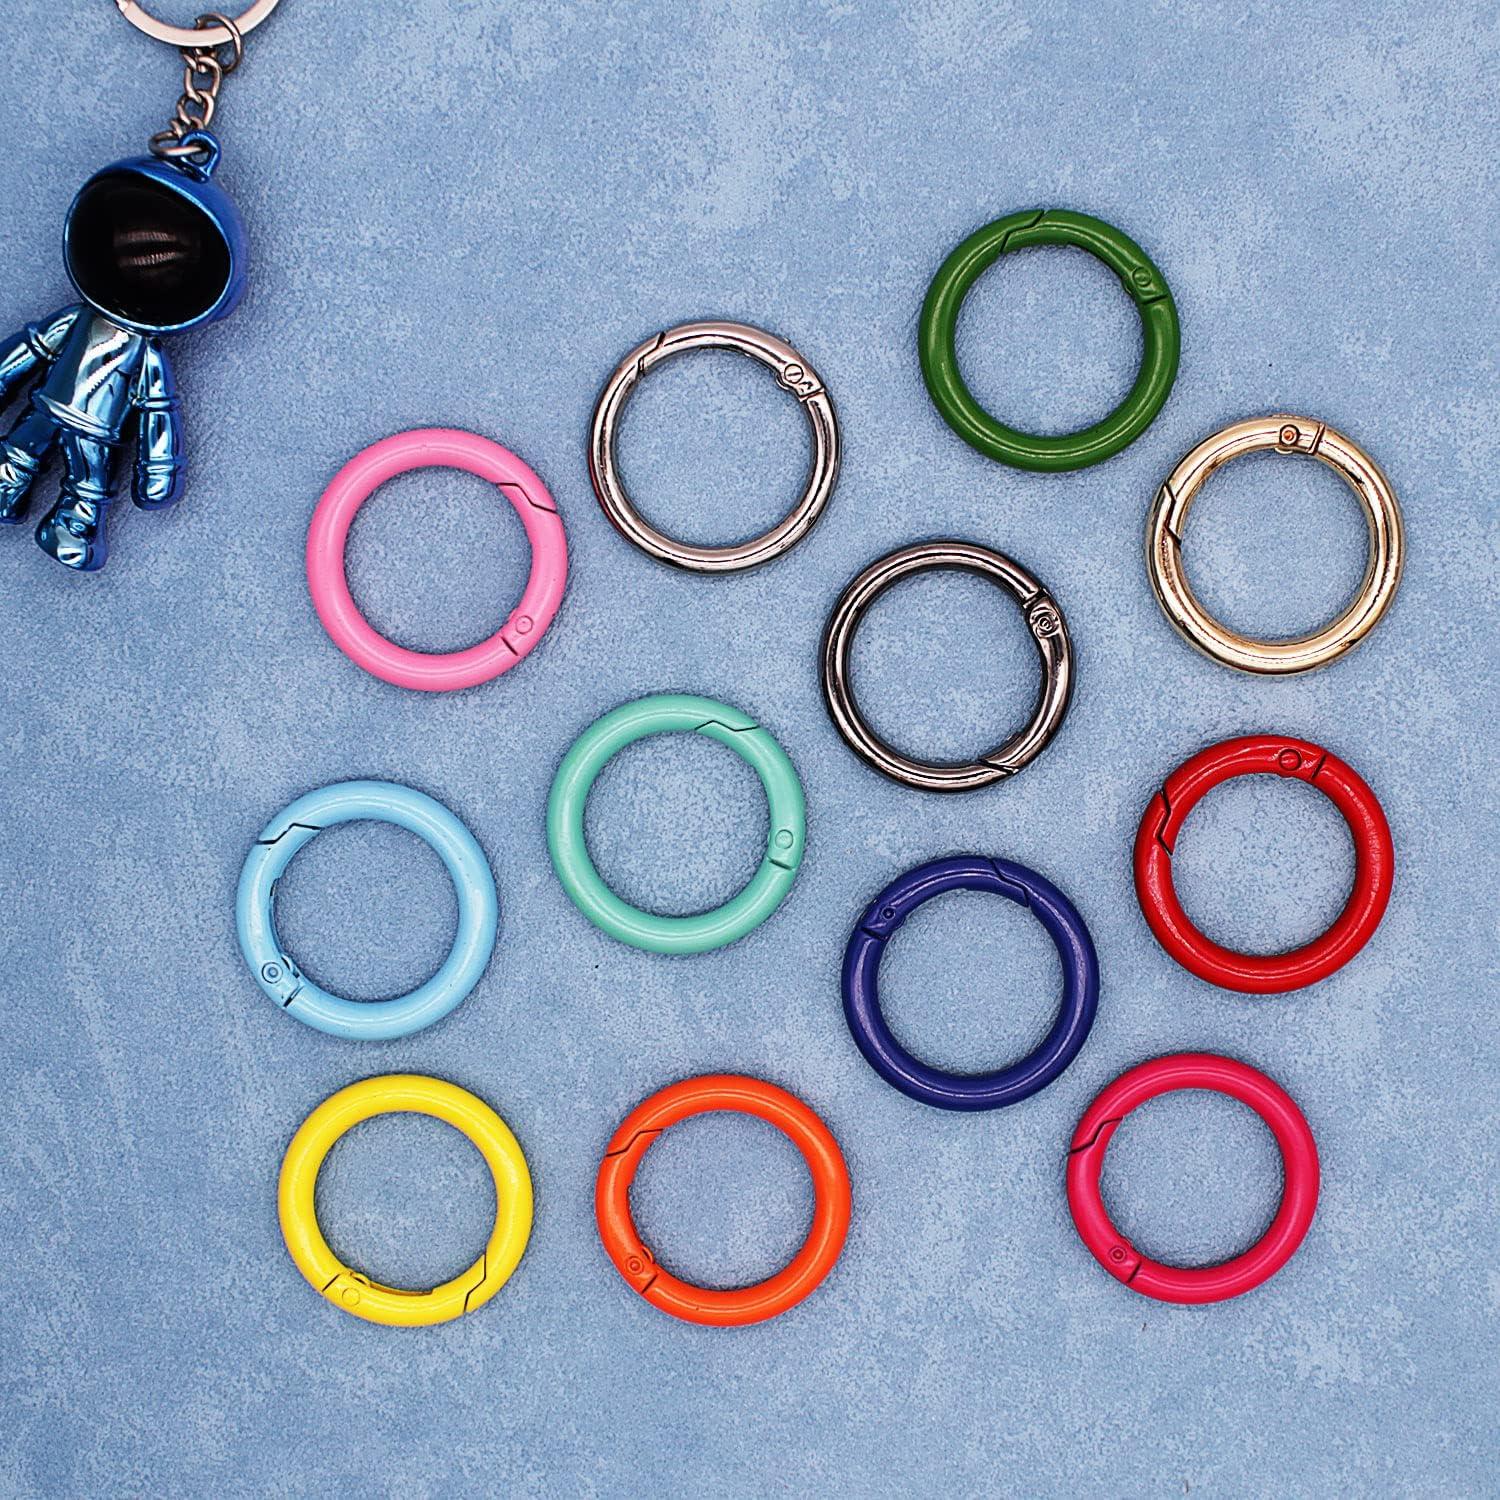 Metal O Ring Spring Clasps - Round Keychain Clasps Jewelry Making Supplies  5pcs